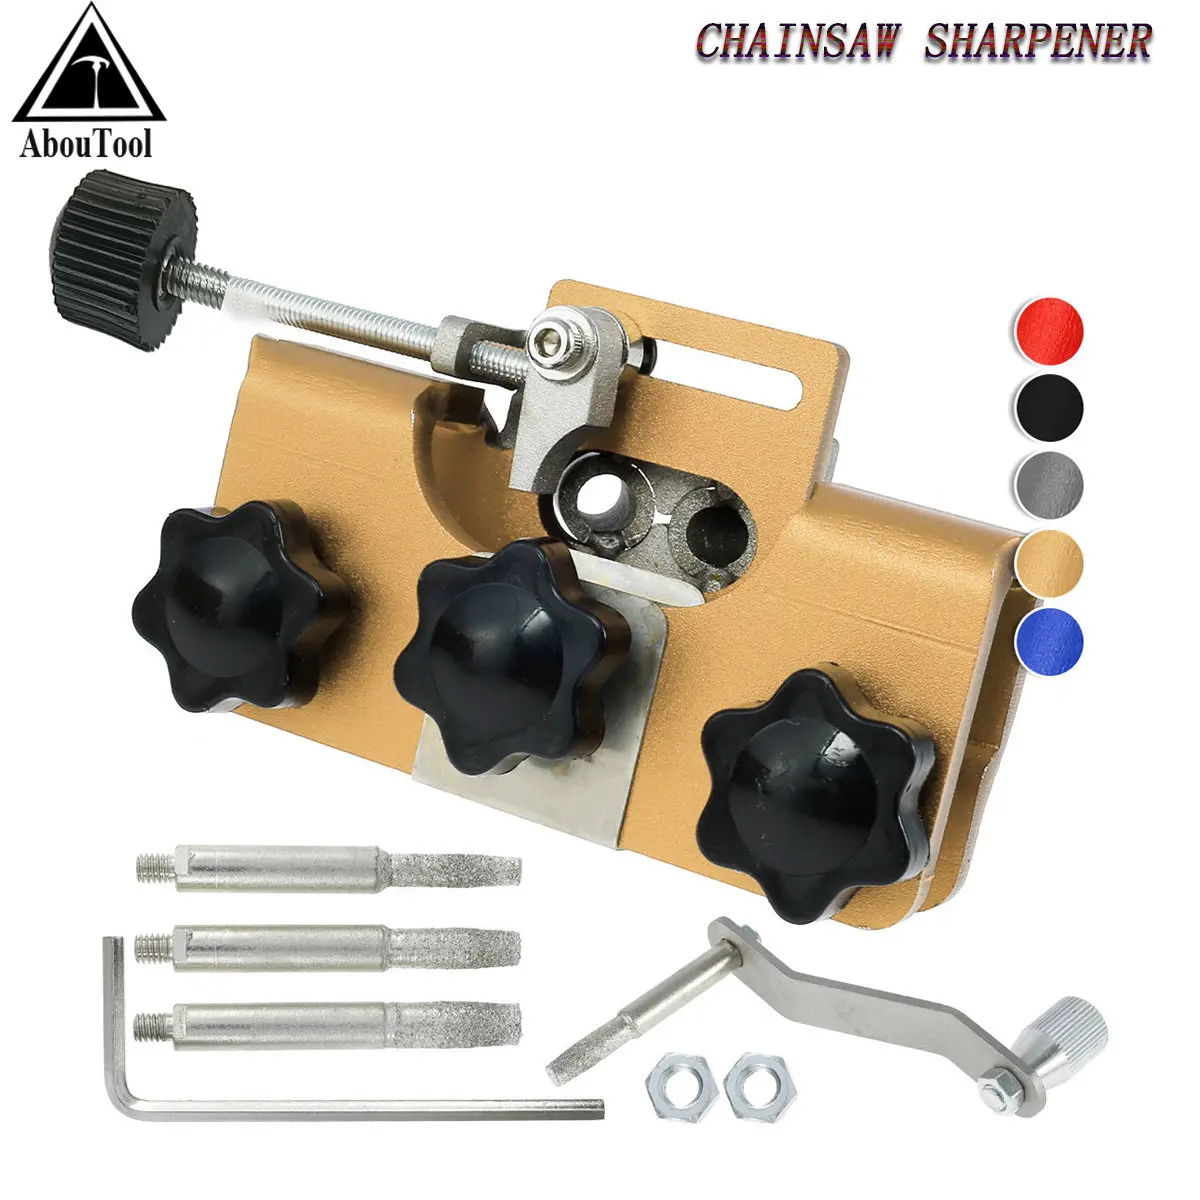 

New Chainsaw Sharpener Jig Manual Chainsaw Chain Sharpening for Most Chain Saw Electric Saws Polishing with Sharpening Heads